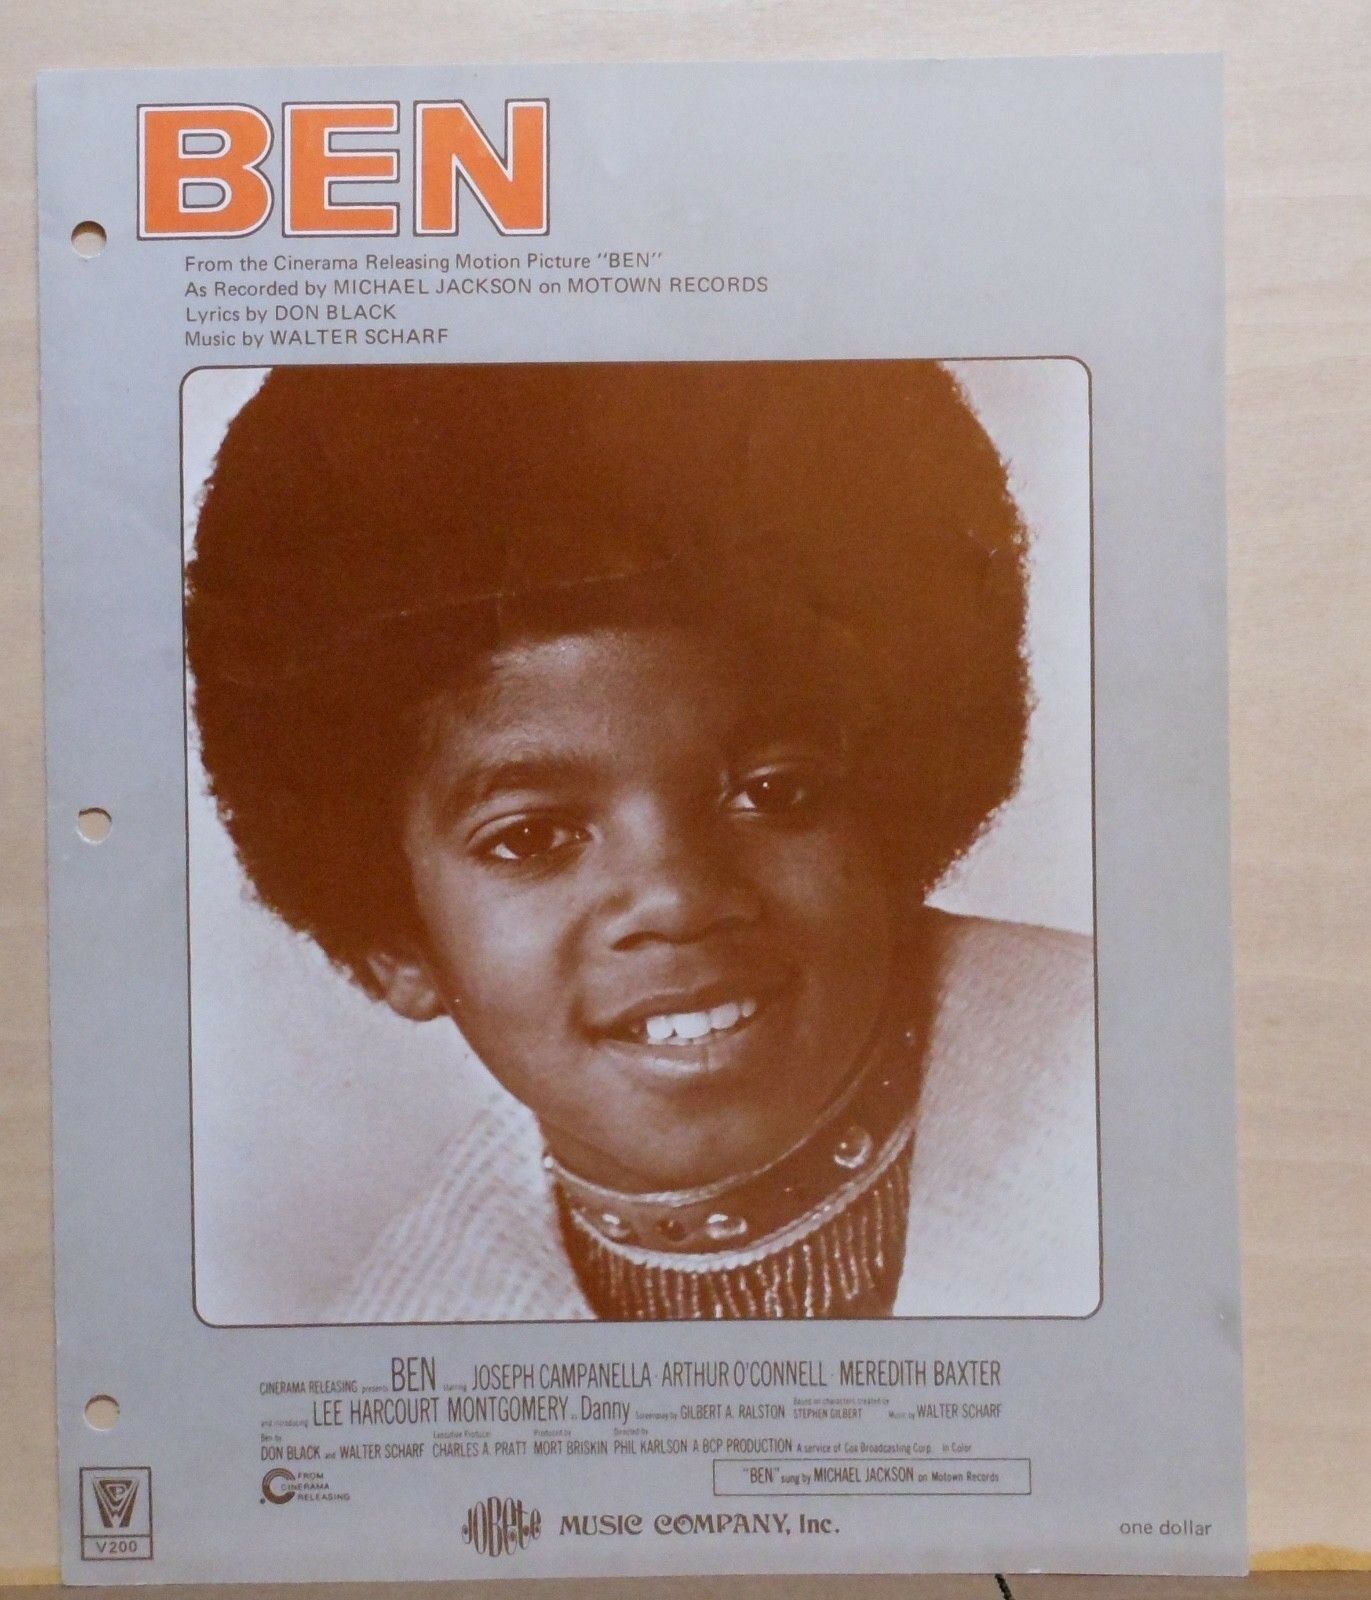 Ben - Vintage 1972 Sheet Music, Cover Photo Of Michael Jackson, From Movie "ben"